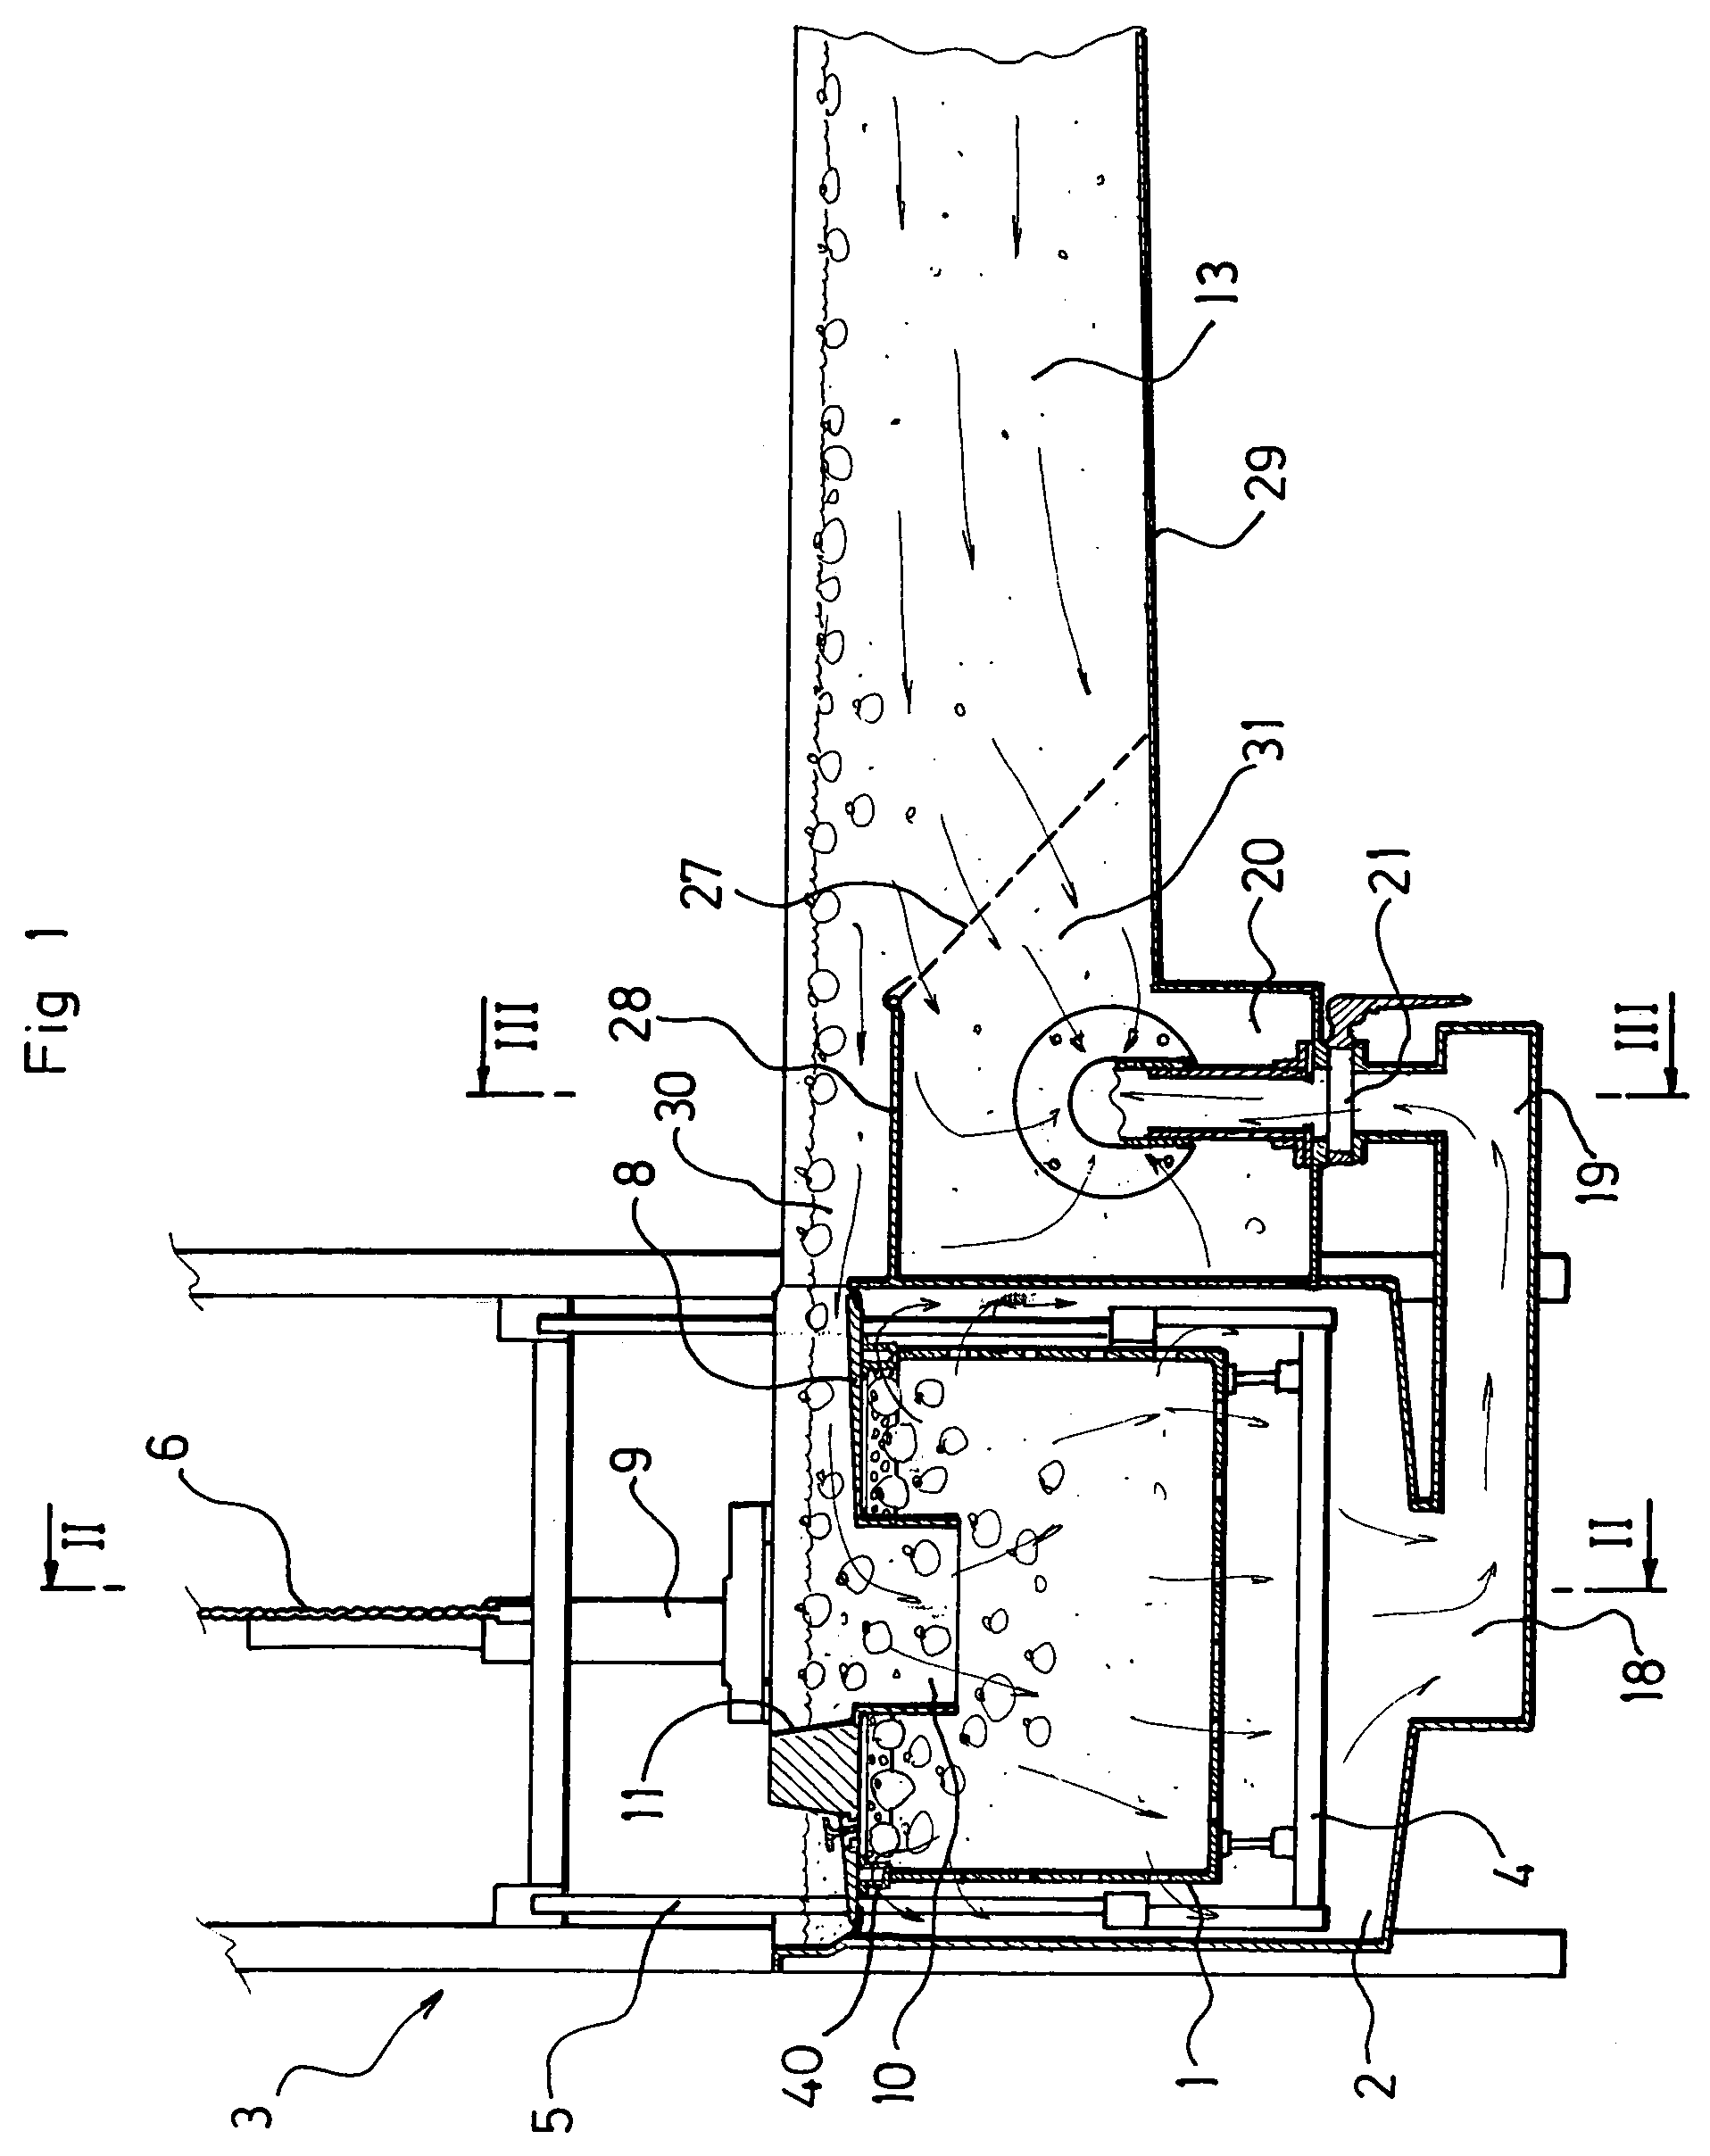 Installation for hydraulically filling crates with floating objects such as fruits and having a single double-acting pump